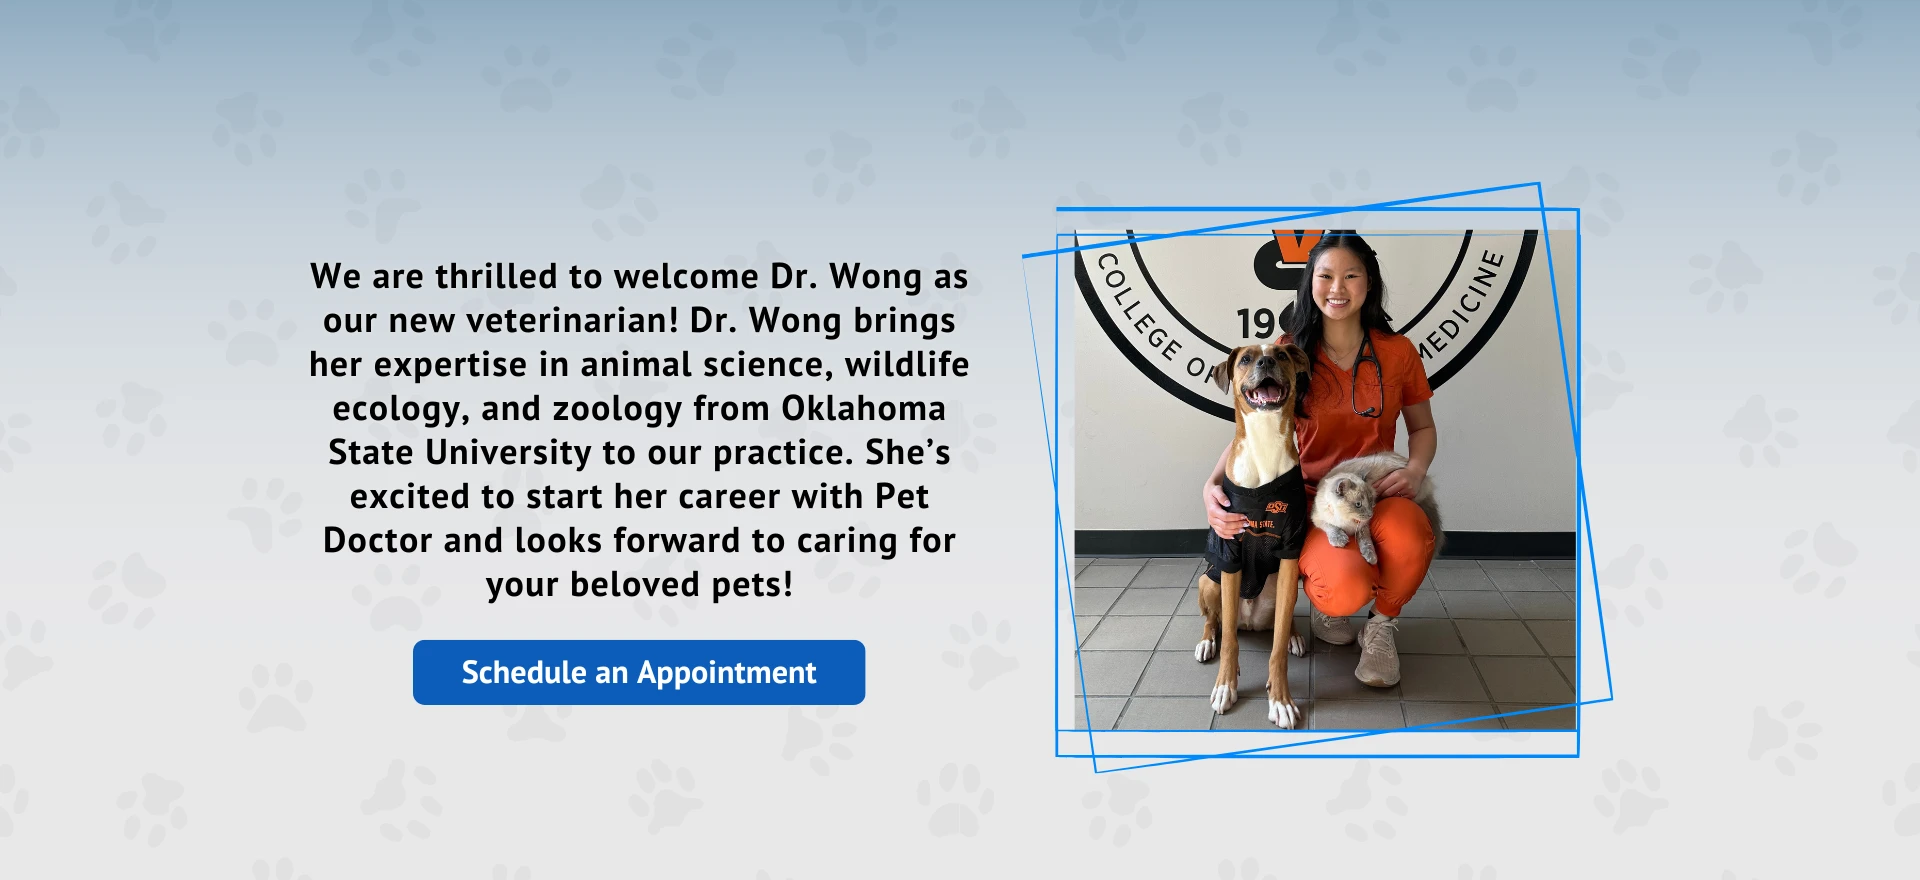 We are thrilled to welcome Dr. Wong as our new veterinarian!